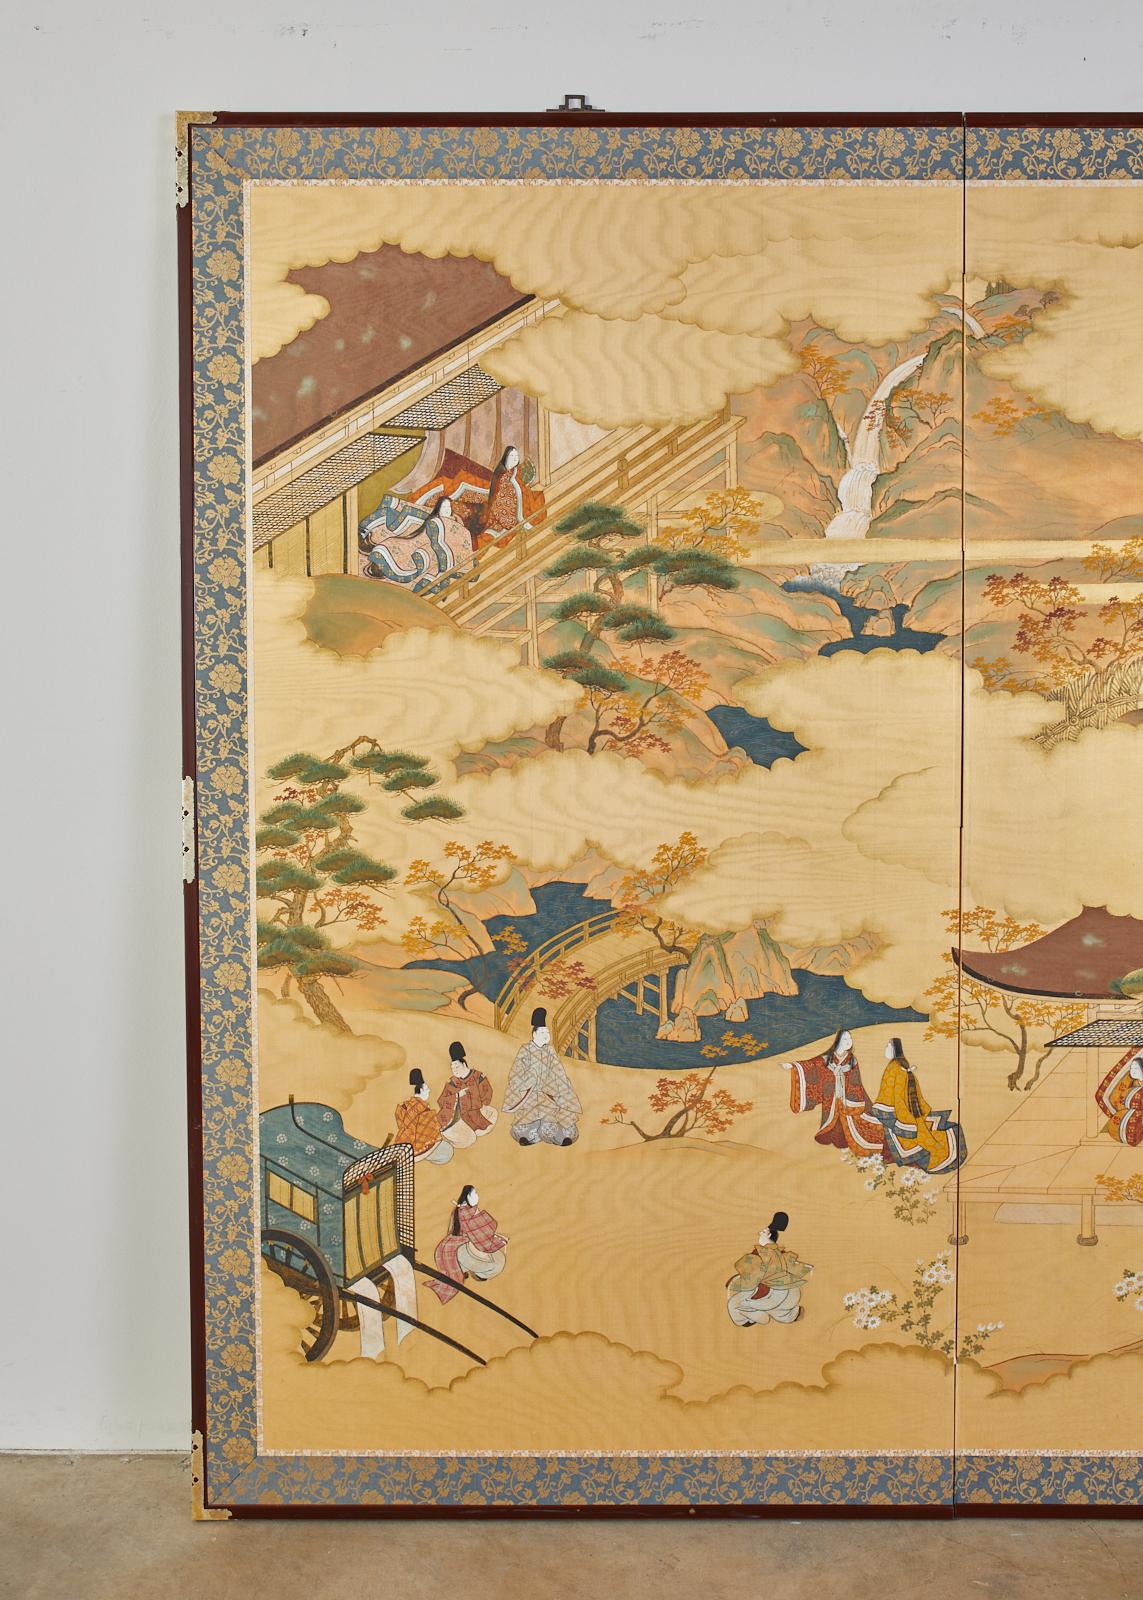 Large Japanese two-panel screen hand painted on silk signed by artist Shunsui with a seal. Depicts scene from romantic narrative tale of Genji from the Heian period. Made in the Nihonga school style with ink and color pigments over a gold silk